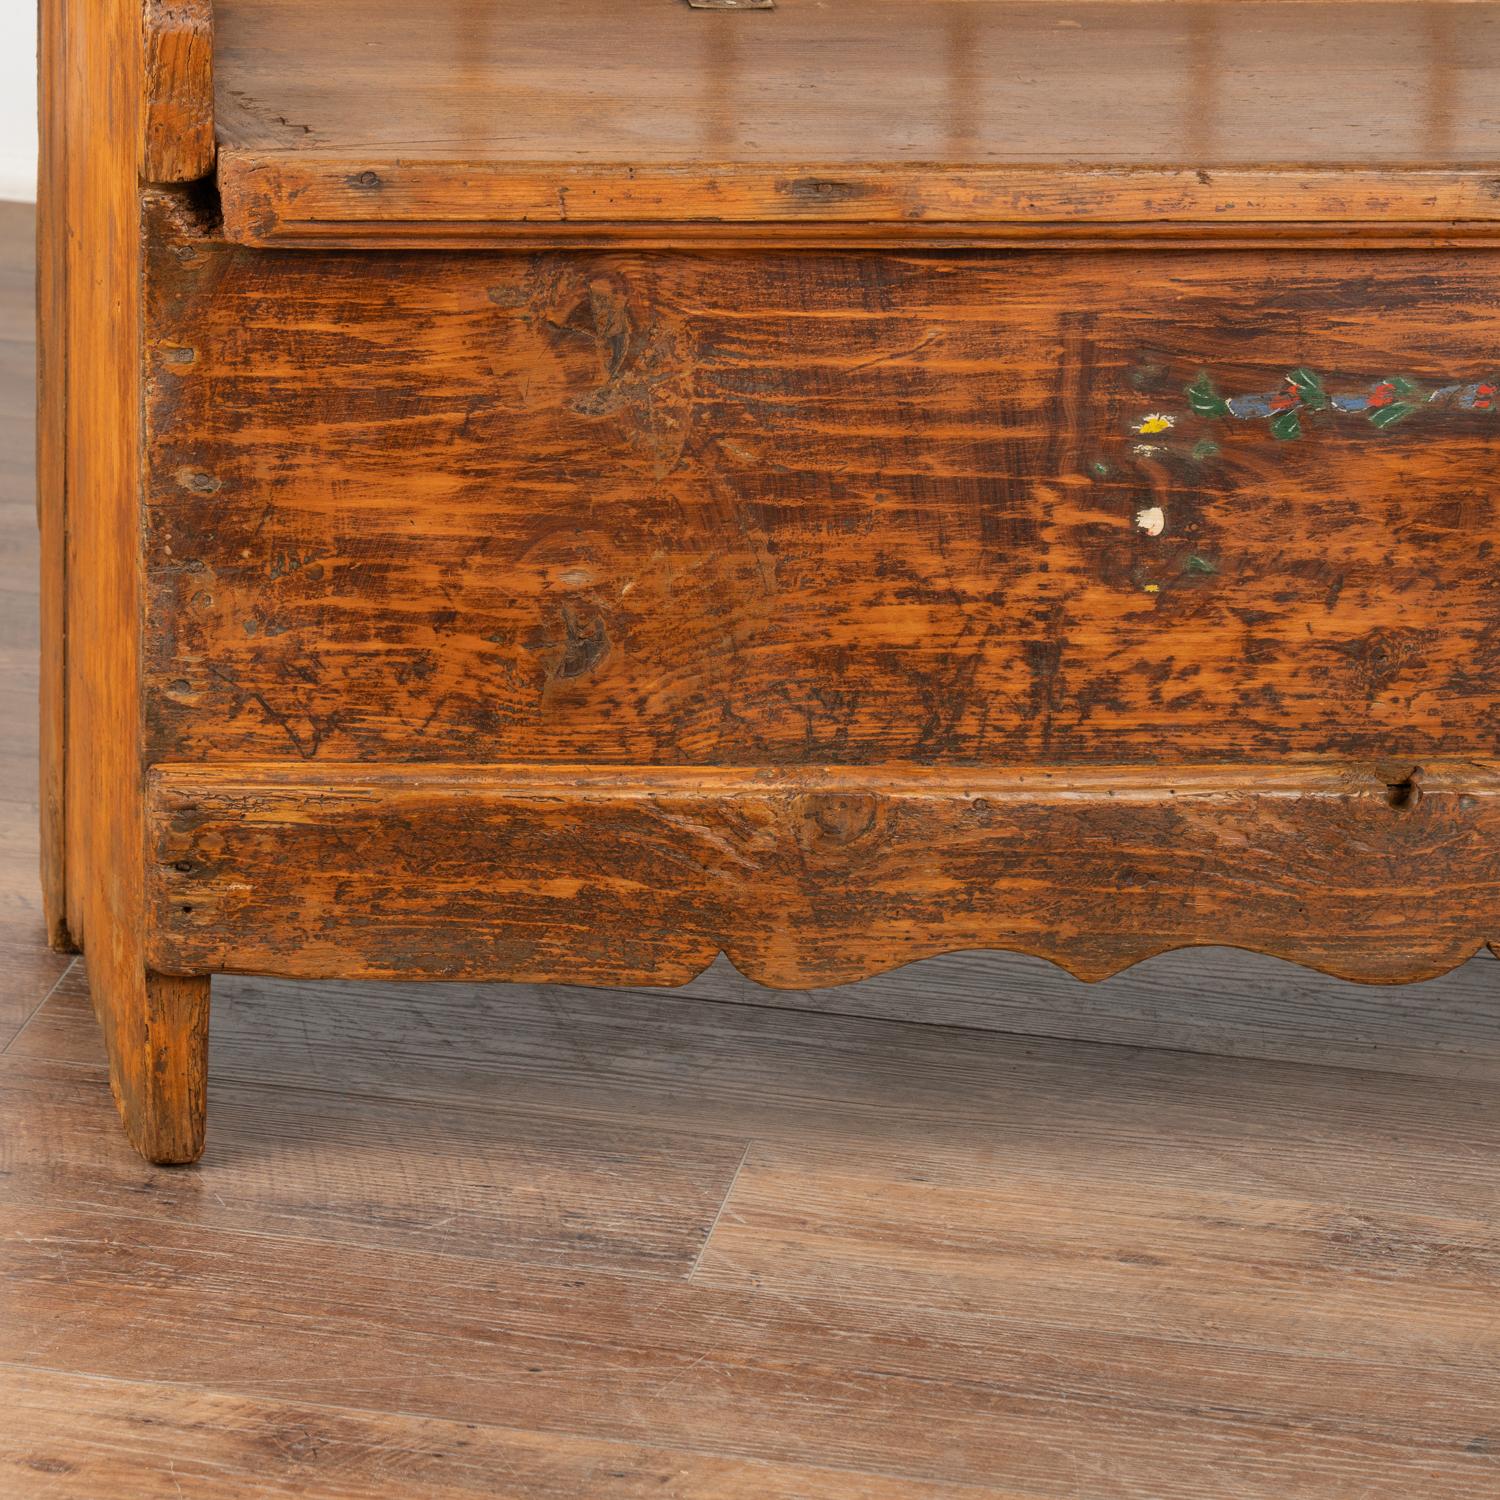 Long Hand Painted Bench With Interior Storage, Hungary circa 1880 For Sale 2